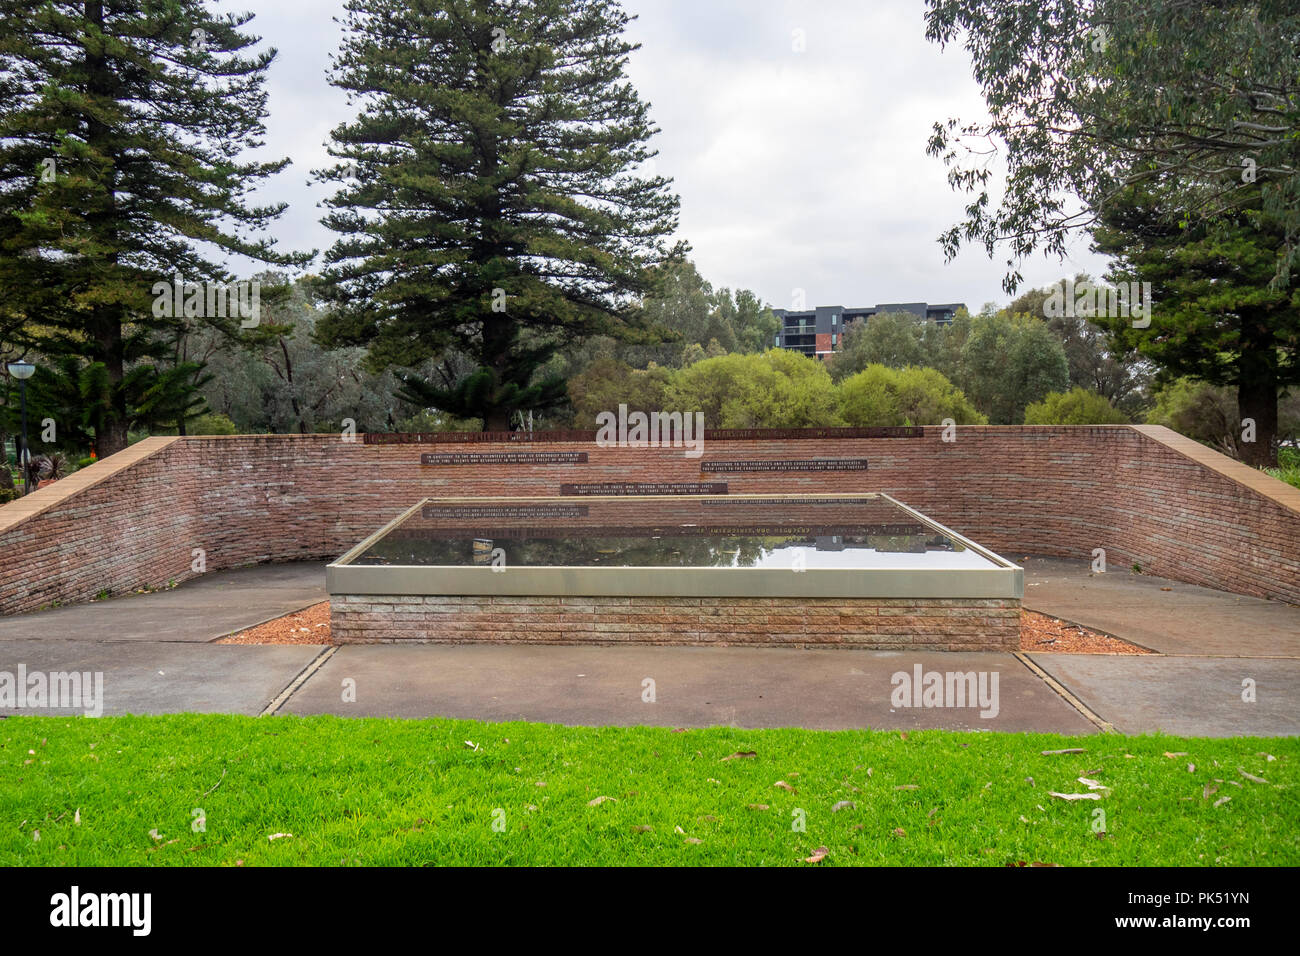 An AIDS memorial 2001 with a reflection pond, monument commemorating all who have died from AIDS, located in Robertson Park, Perth, WA Australia. Stock Photo